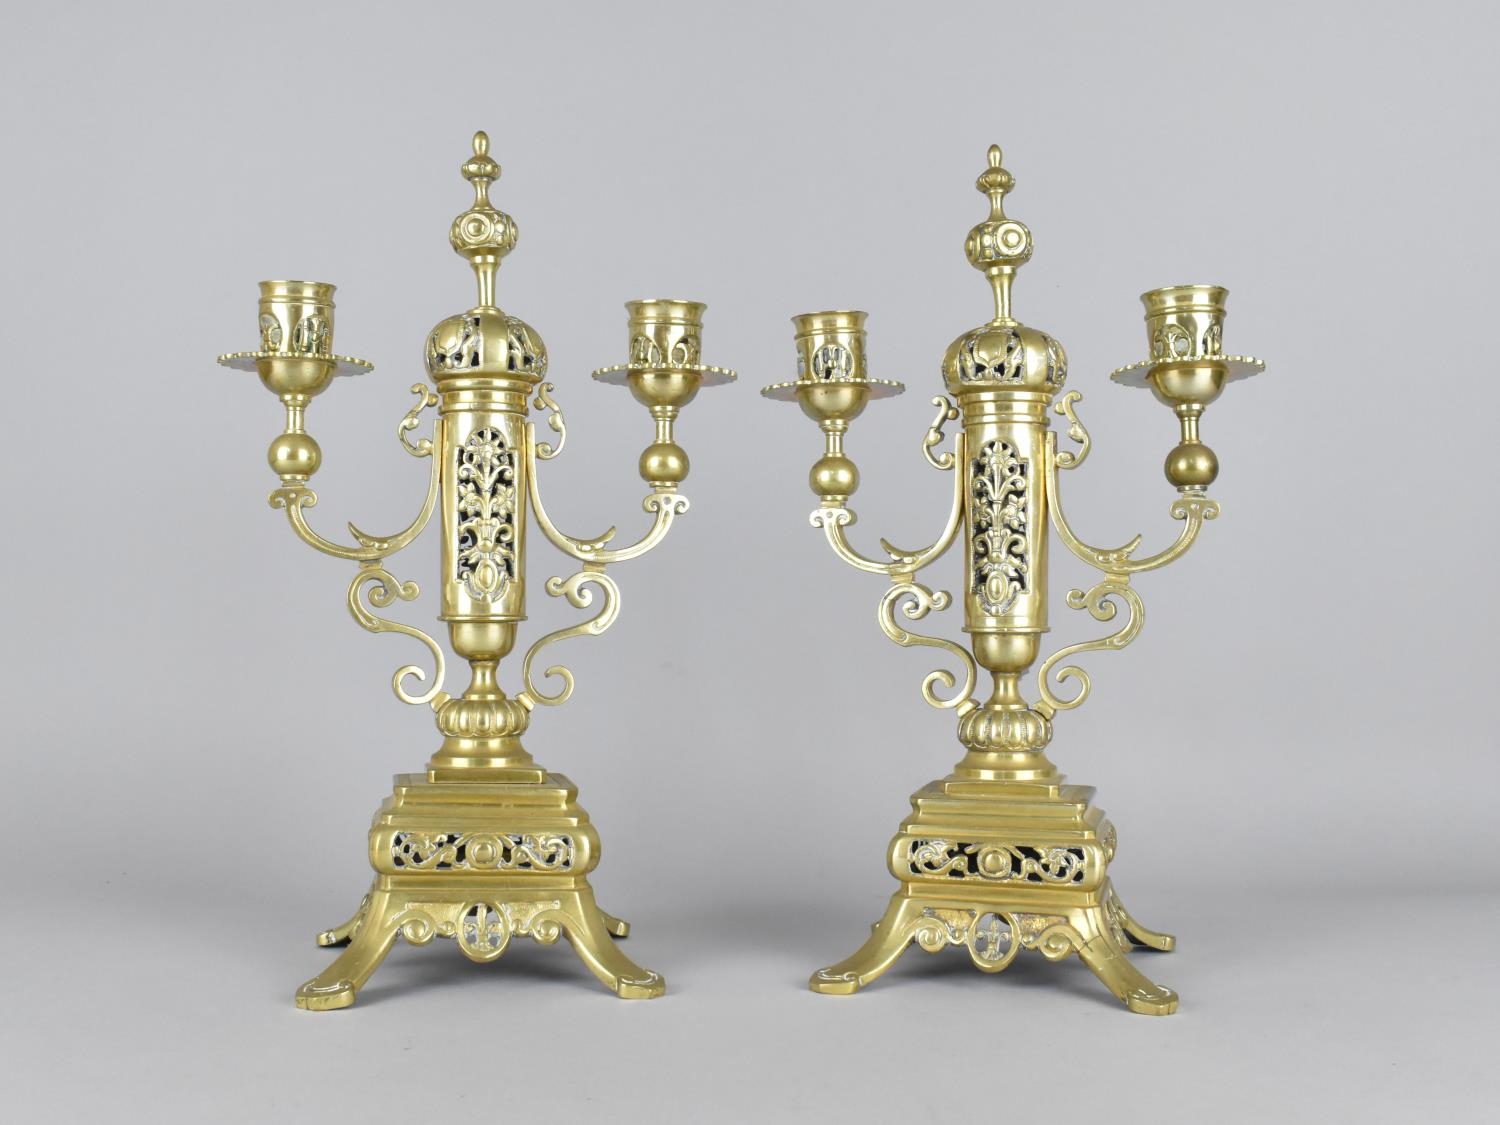 A Pair of Ornate Brass Three Branch Candelabra Garnitures with Pierced Supports Surmounted by